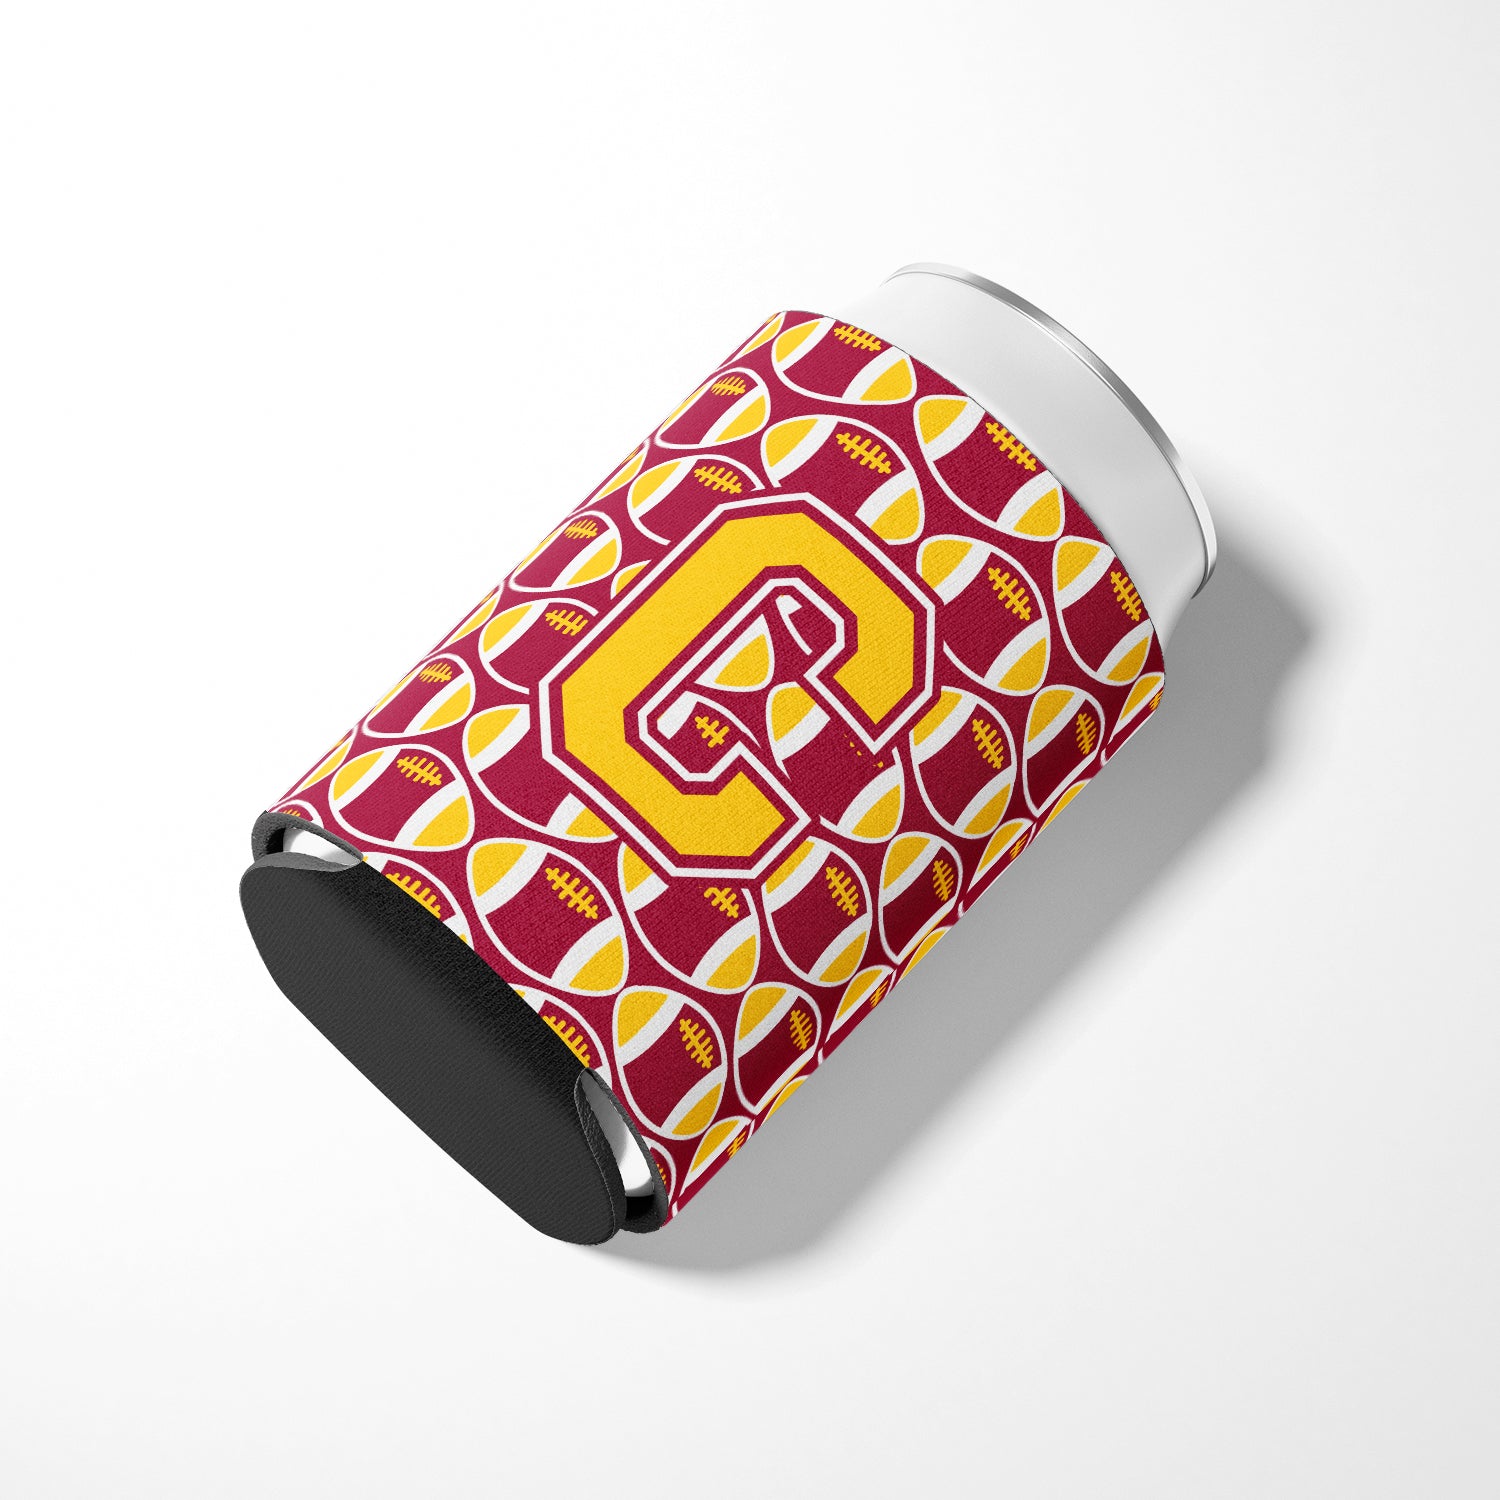 Letter C Football Maroon and Gold Can or Bottle Hugger CJ1081-CCC.